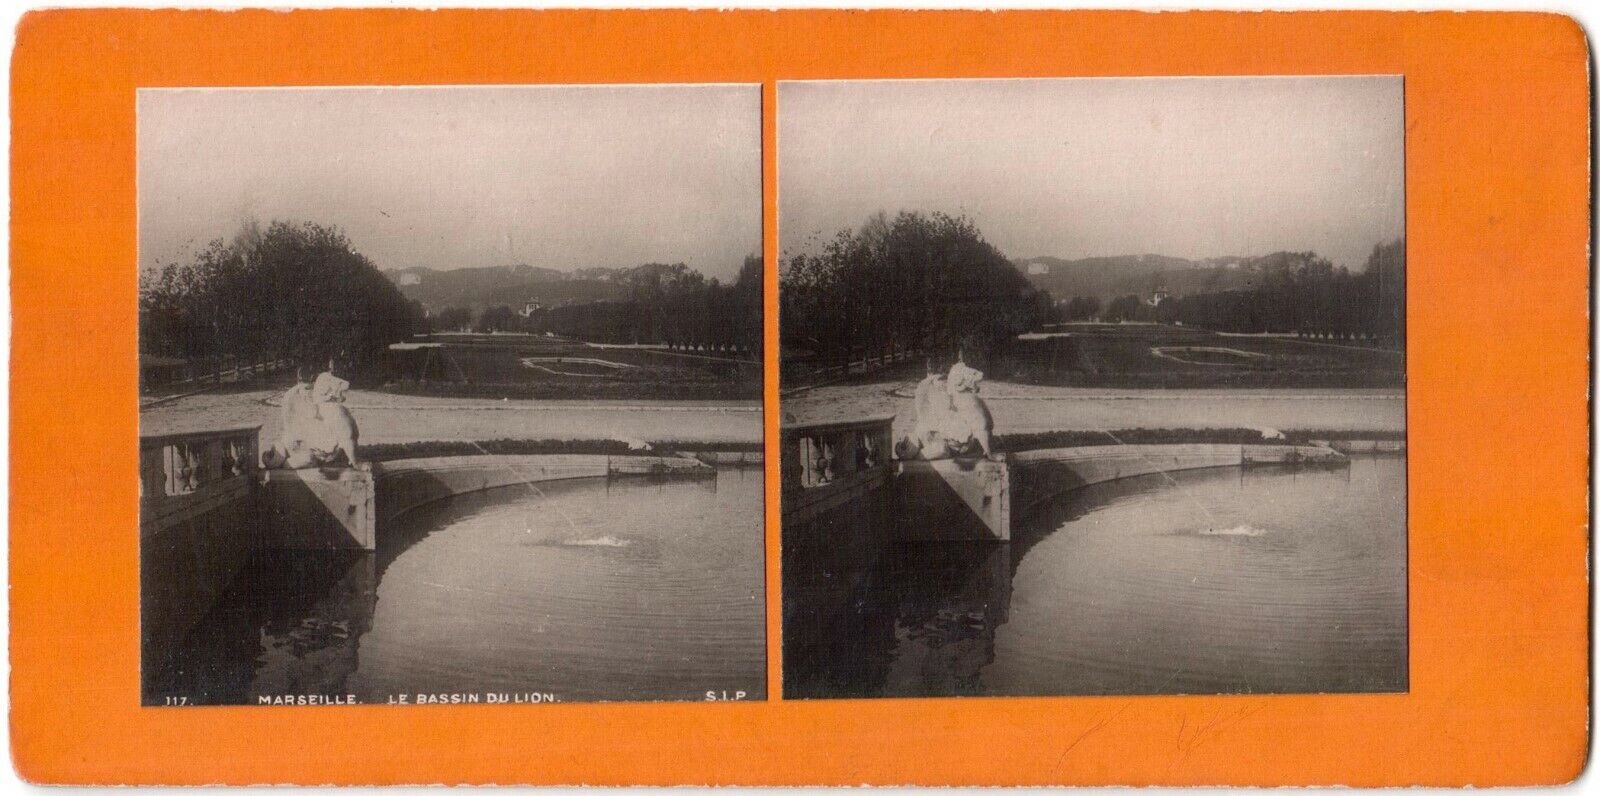 Marseille.Le Bassin du Lion.Fontaine.Film Stereo Photo.S.I.P.Stereoview.